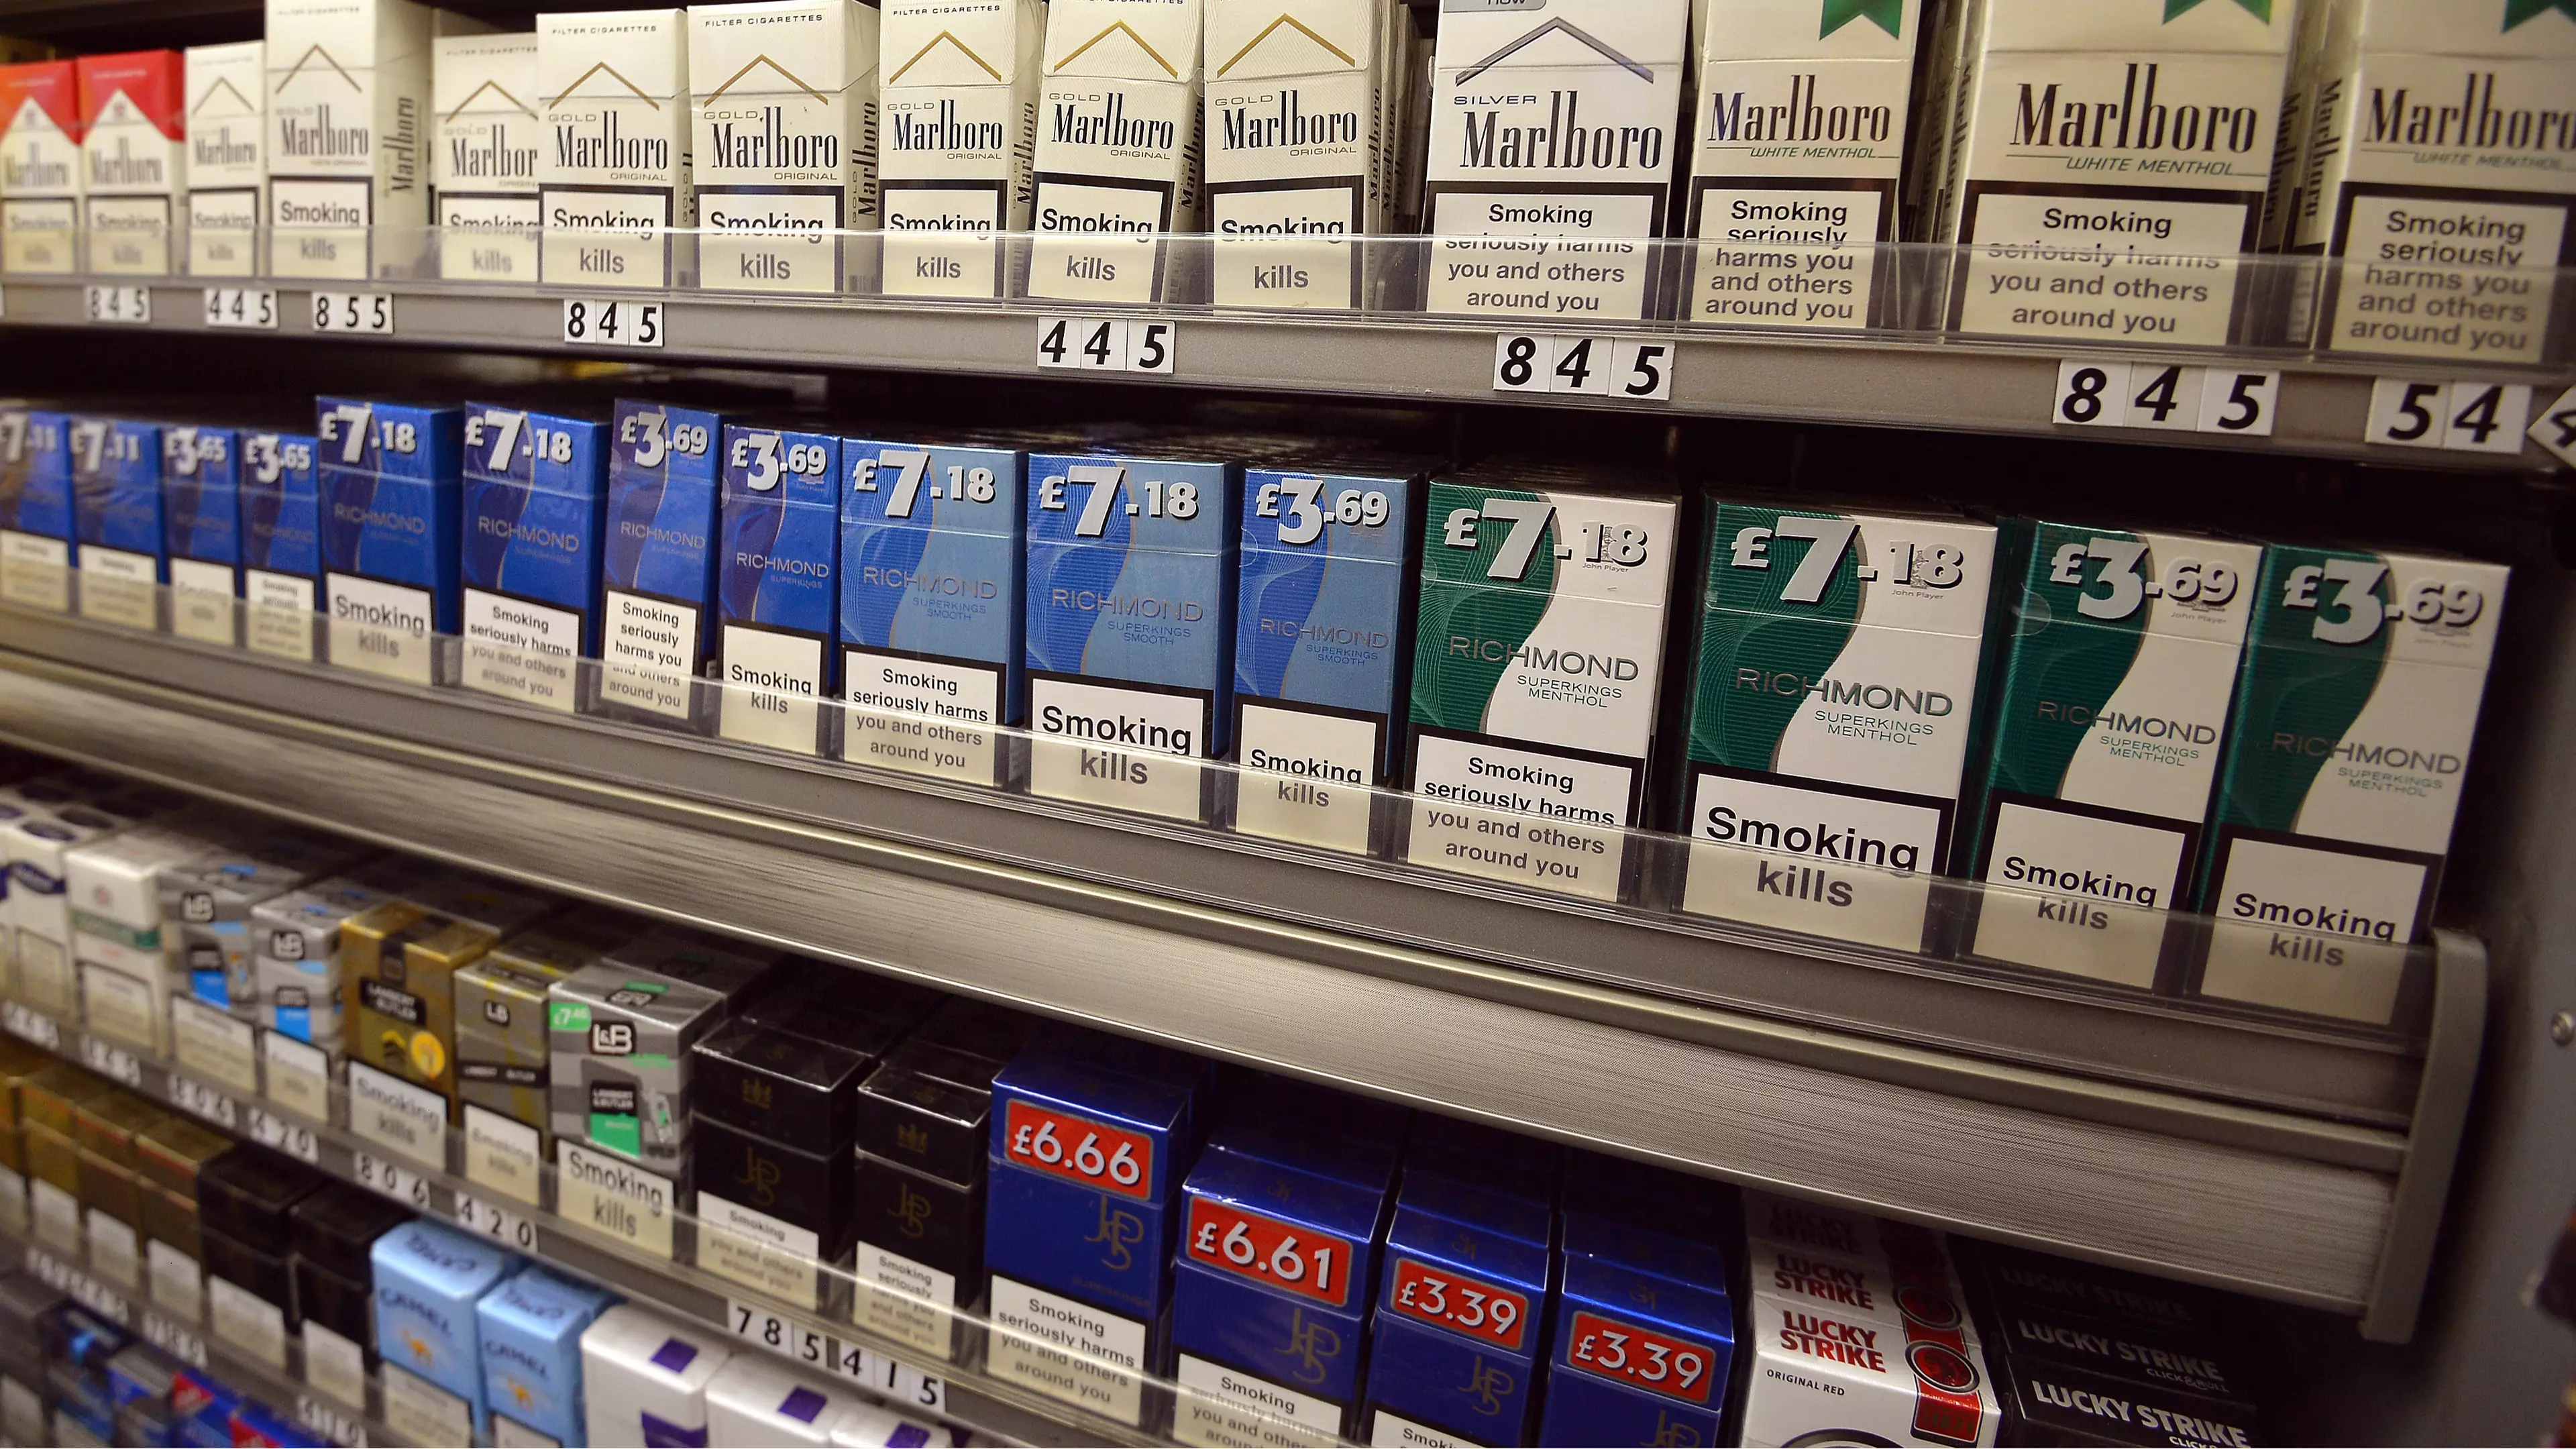 Government Ban On Small Pack Of Menthols Set To Start In A Few Weeks